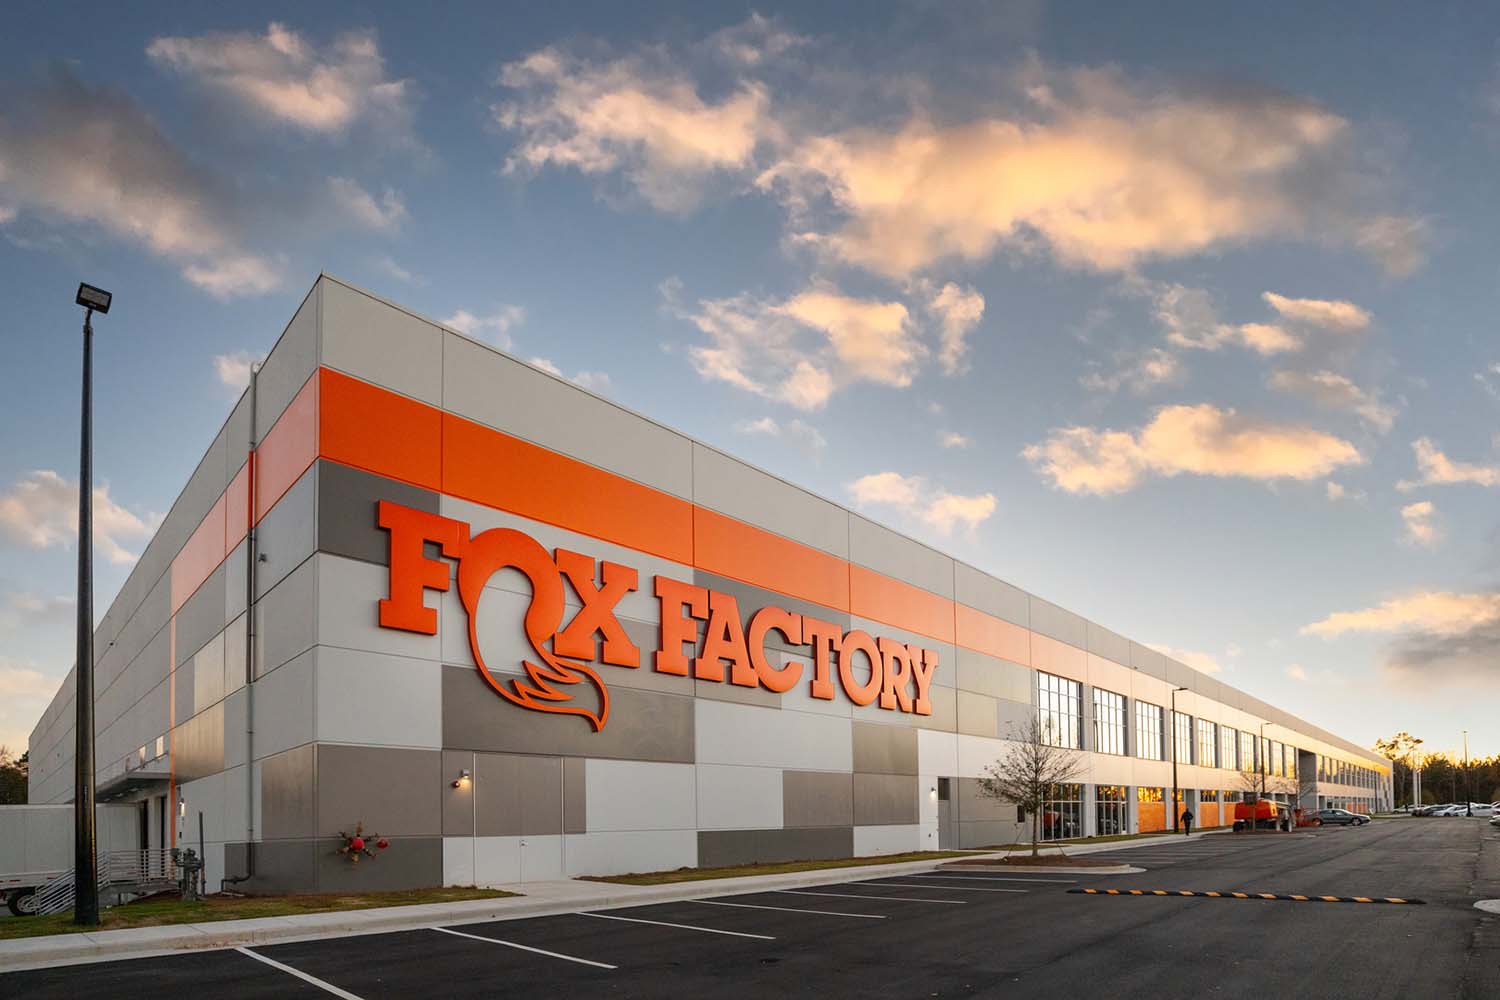 FOX Shocks fabrication and assembly factory in Gainesville, Ga. – Exterior photo